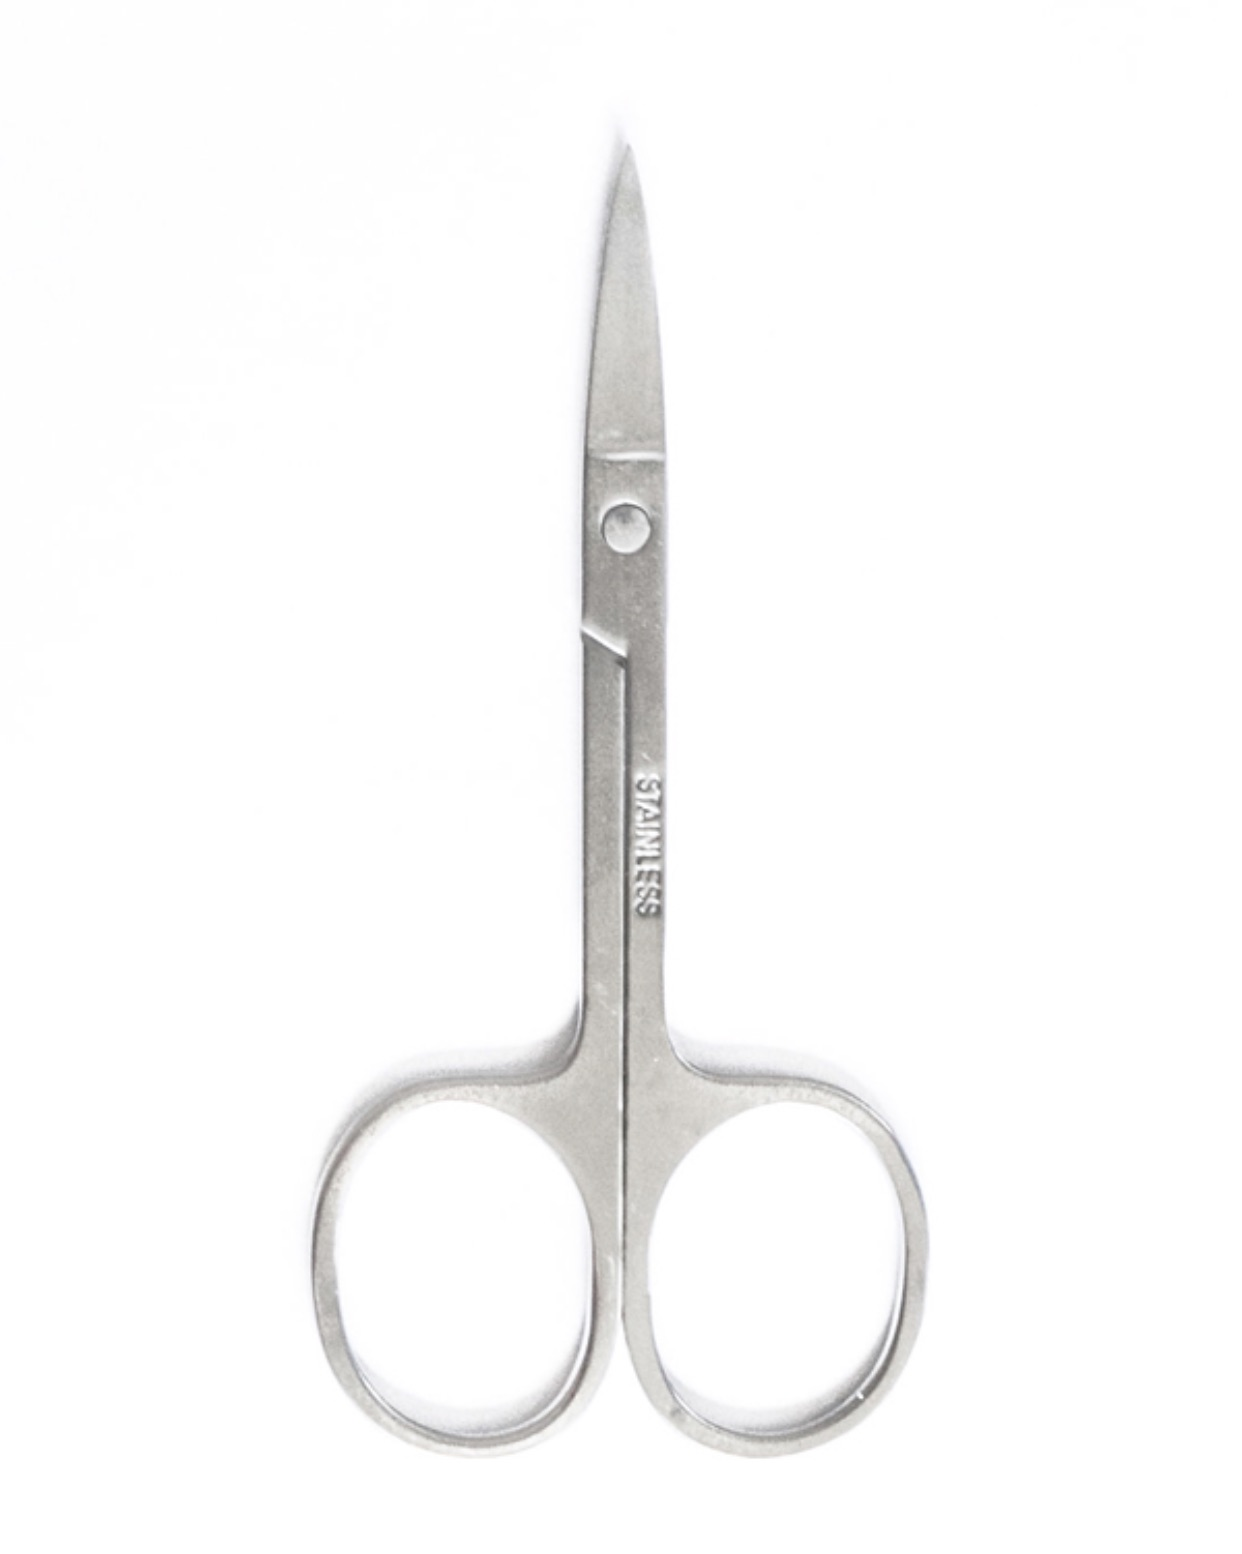 Stainless Steel Lash Scissors – Lashes4today LLC